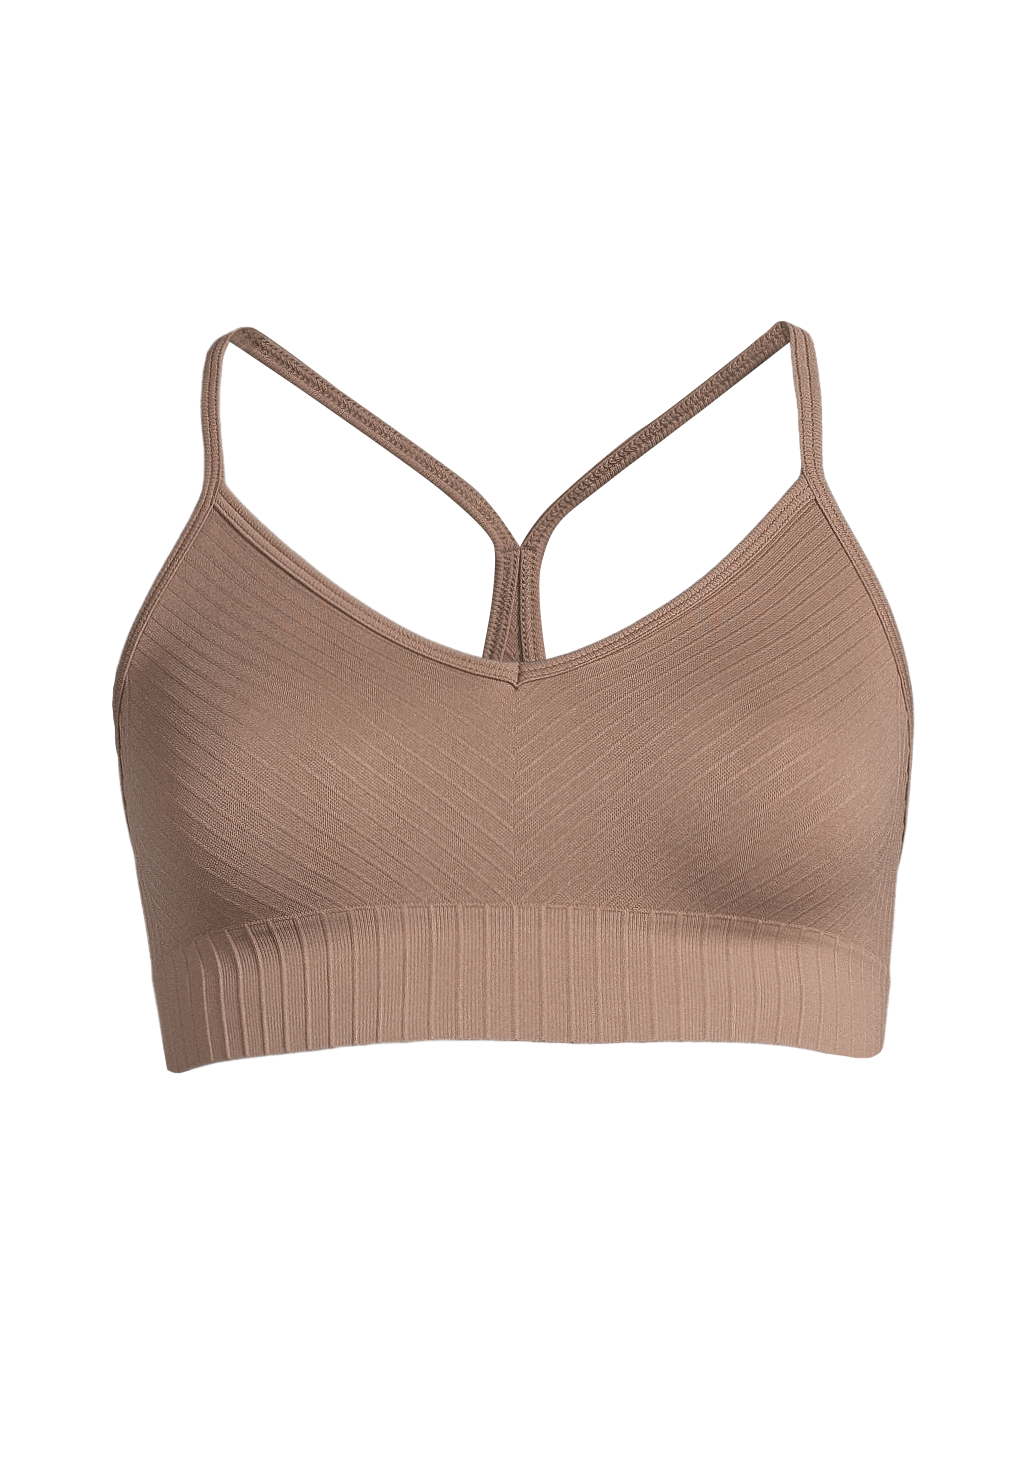 Seamless Graphical Rib Sports Top